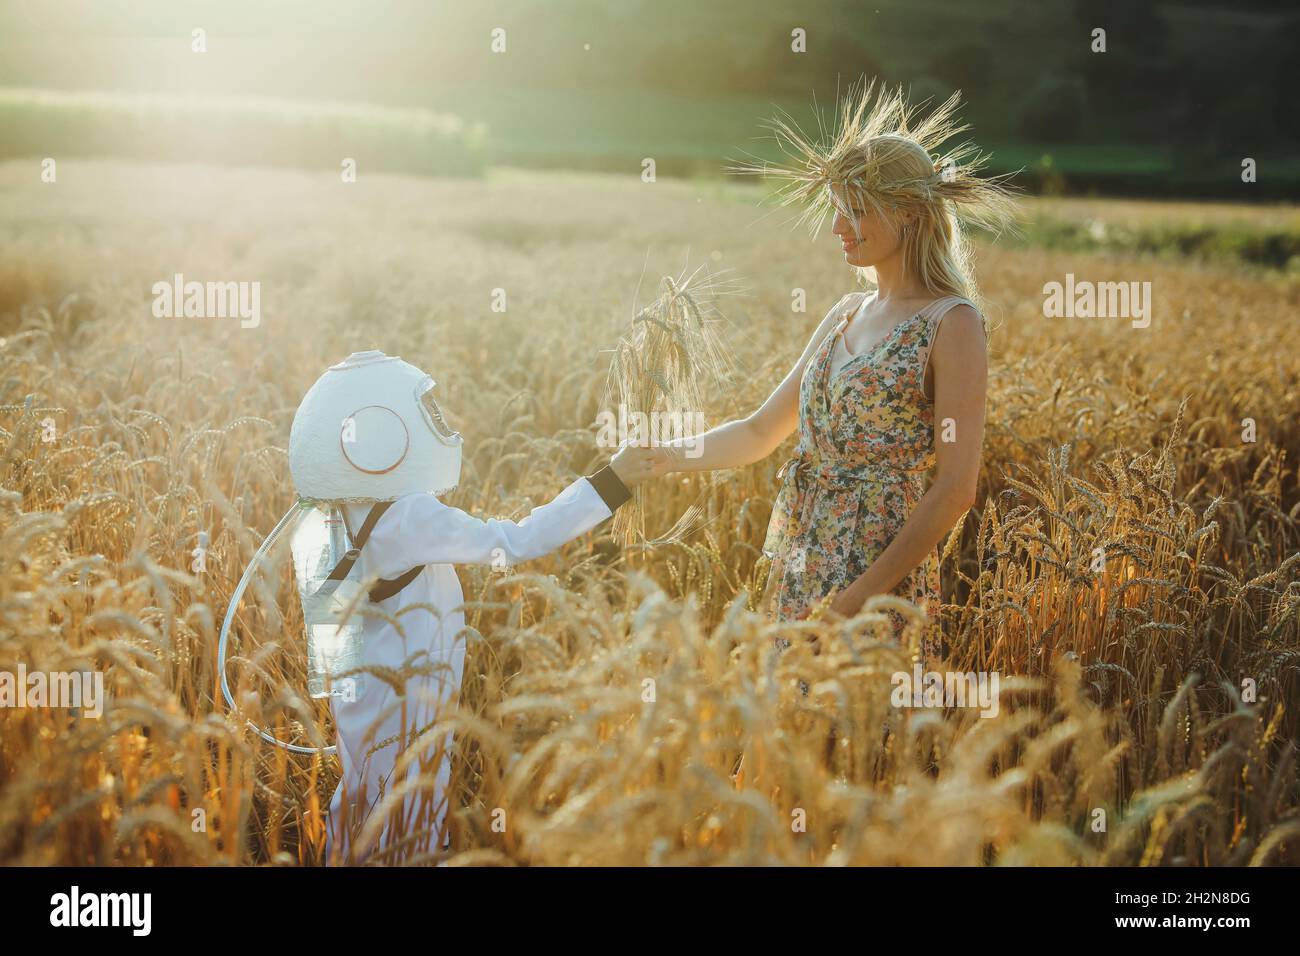 Male astronaut boy giving wheat crops to mother at field Stock Photo